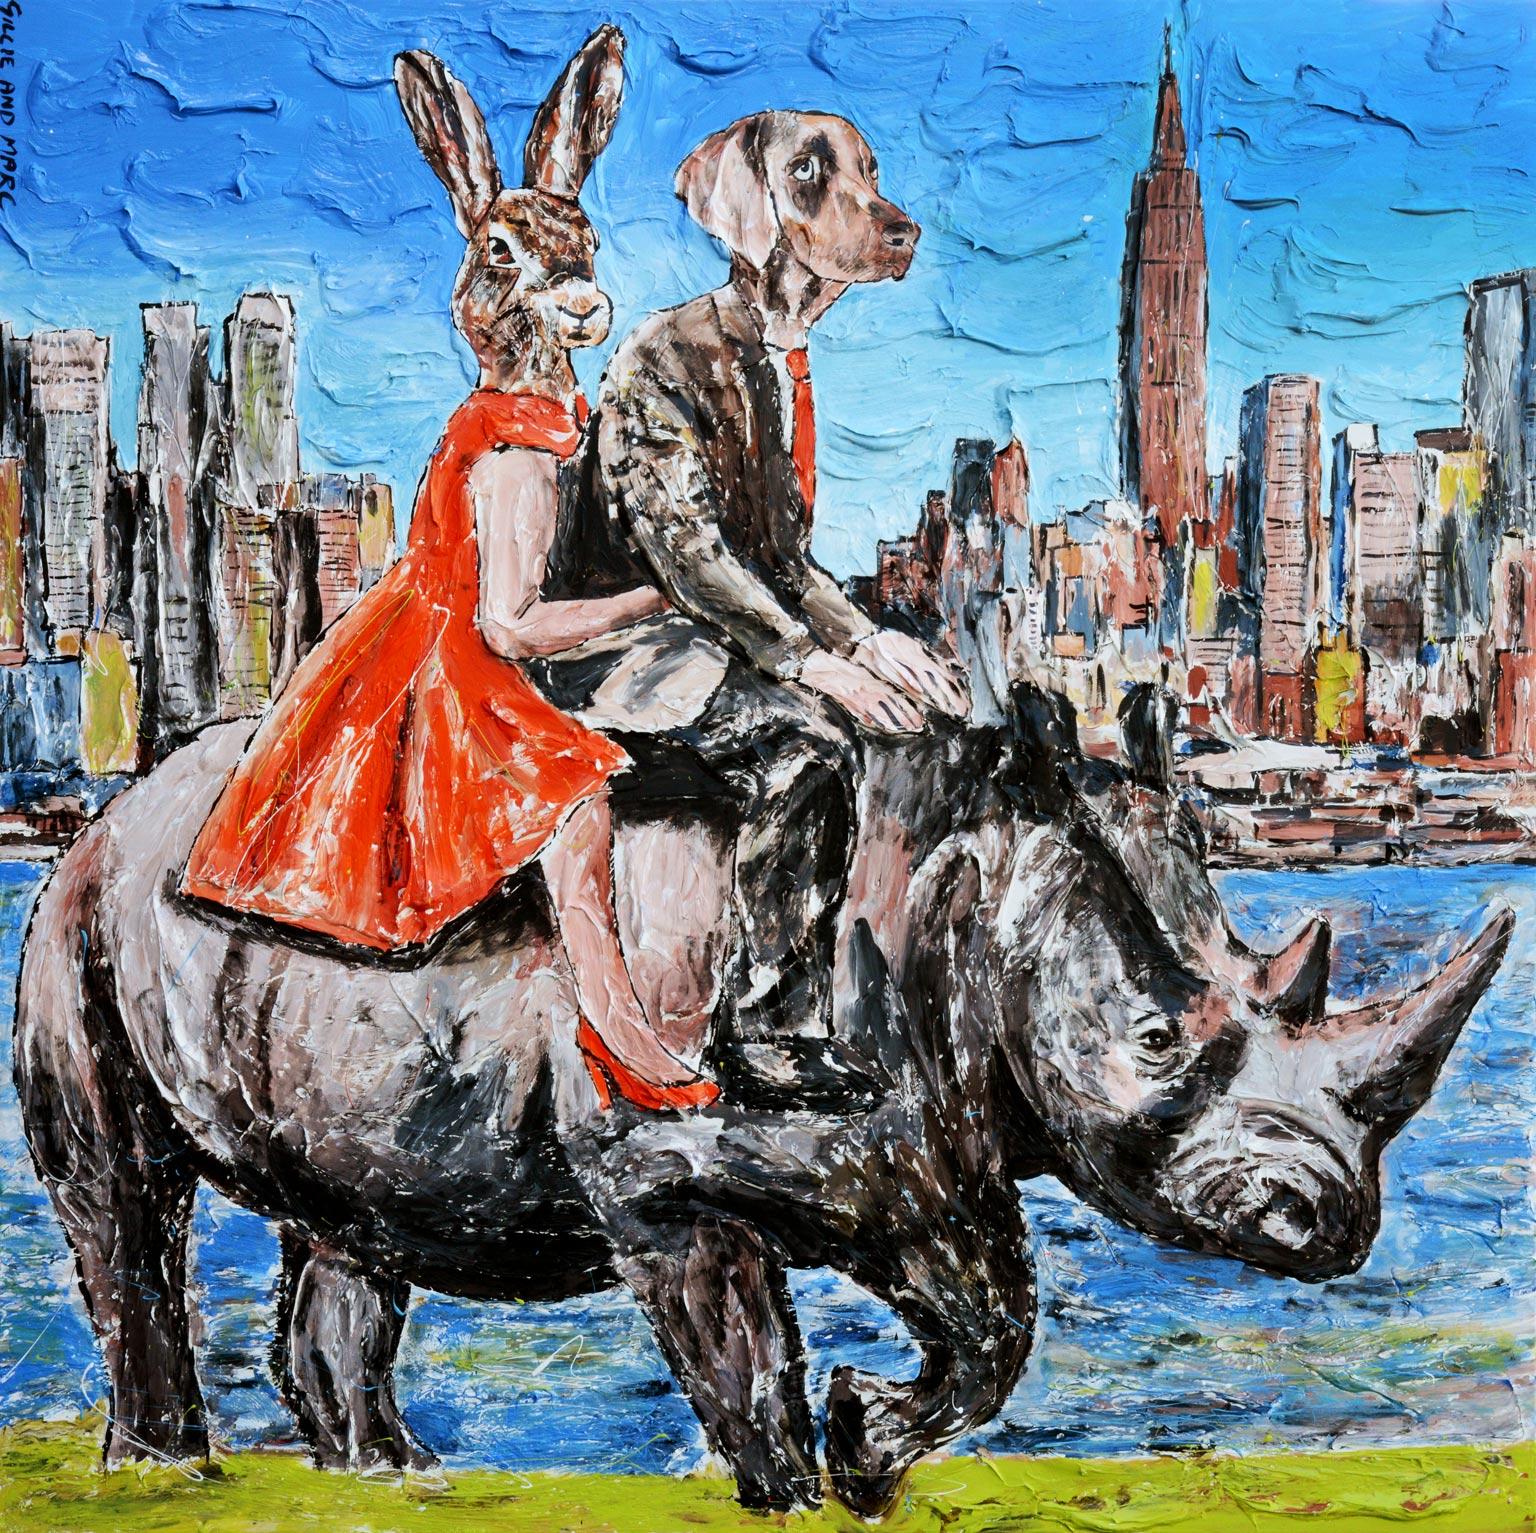 Gillie and Marc Schattner Figurative Print - Animal Print - Gillie and Marc - Limited Ed Giclee- Art - Wild and free in NYC